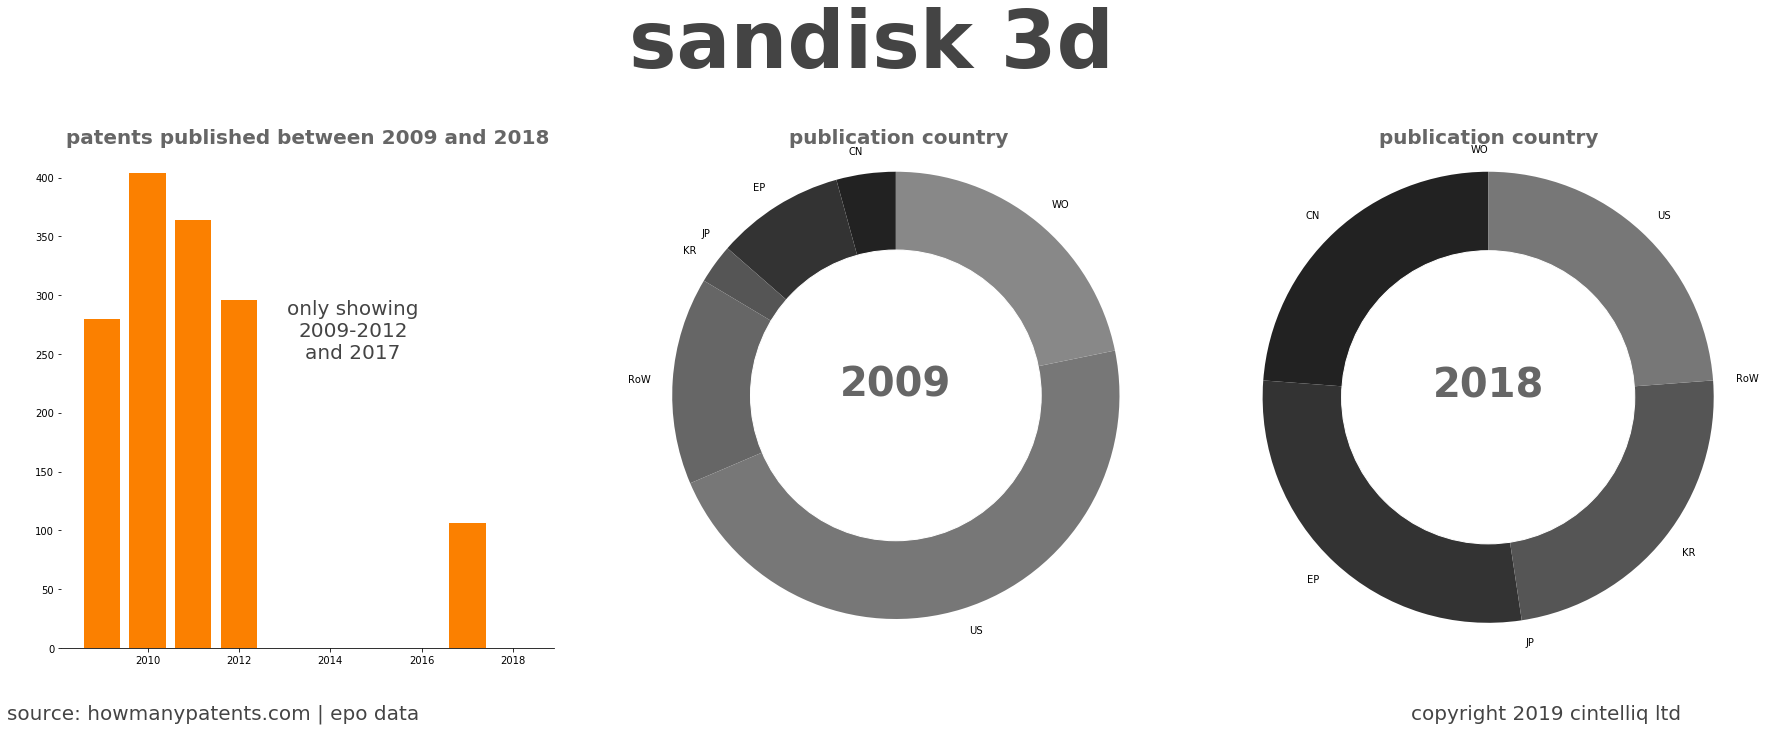 summary of patents for Sandisk 3D